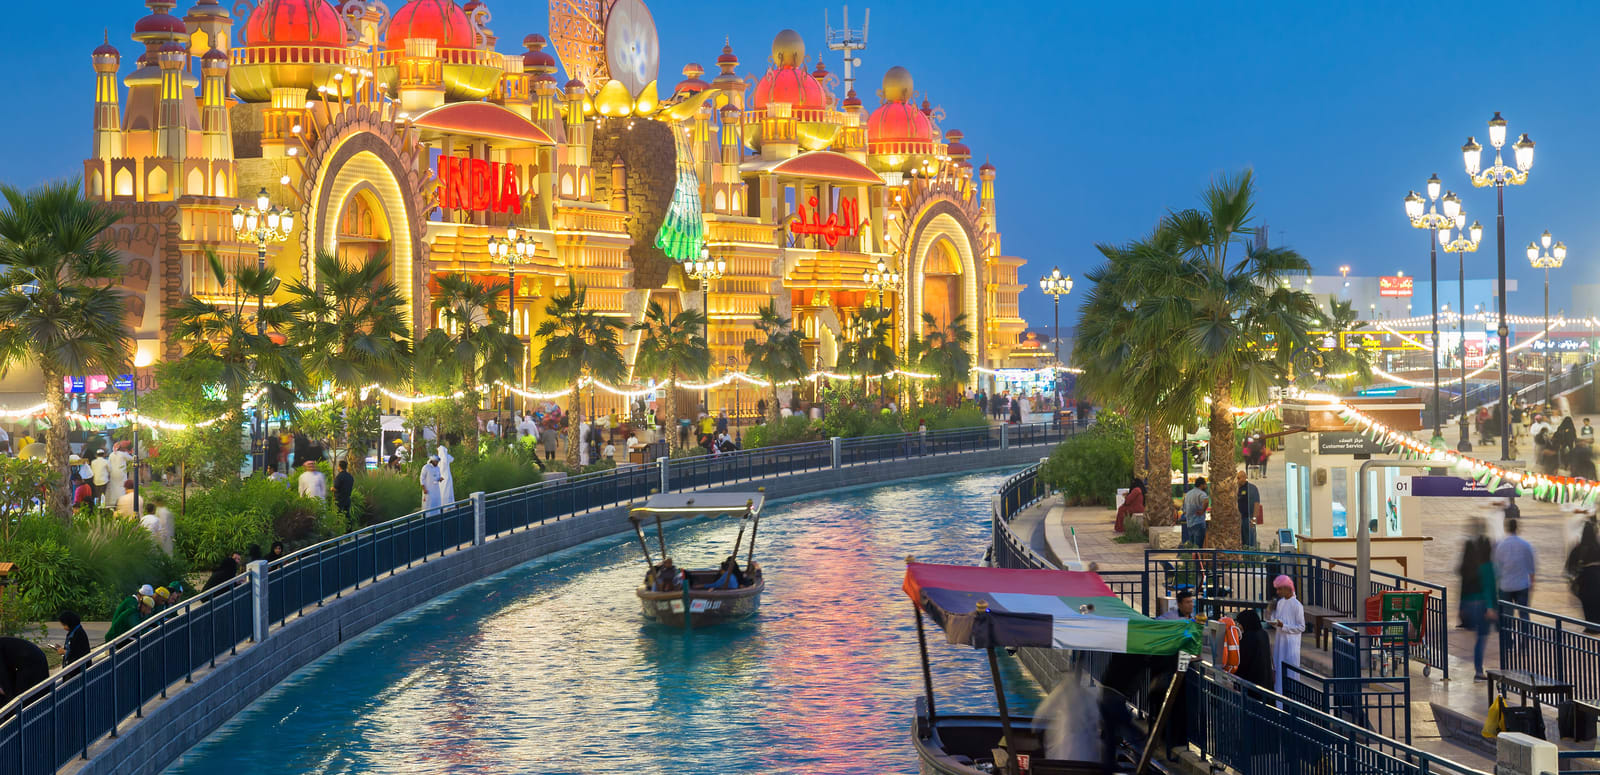 Global Village announces re-opening date for October 2021 - Esquire